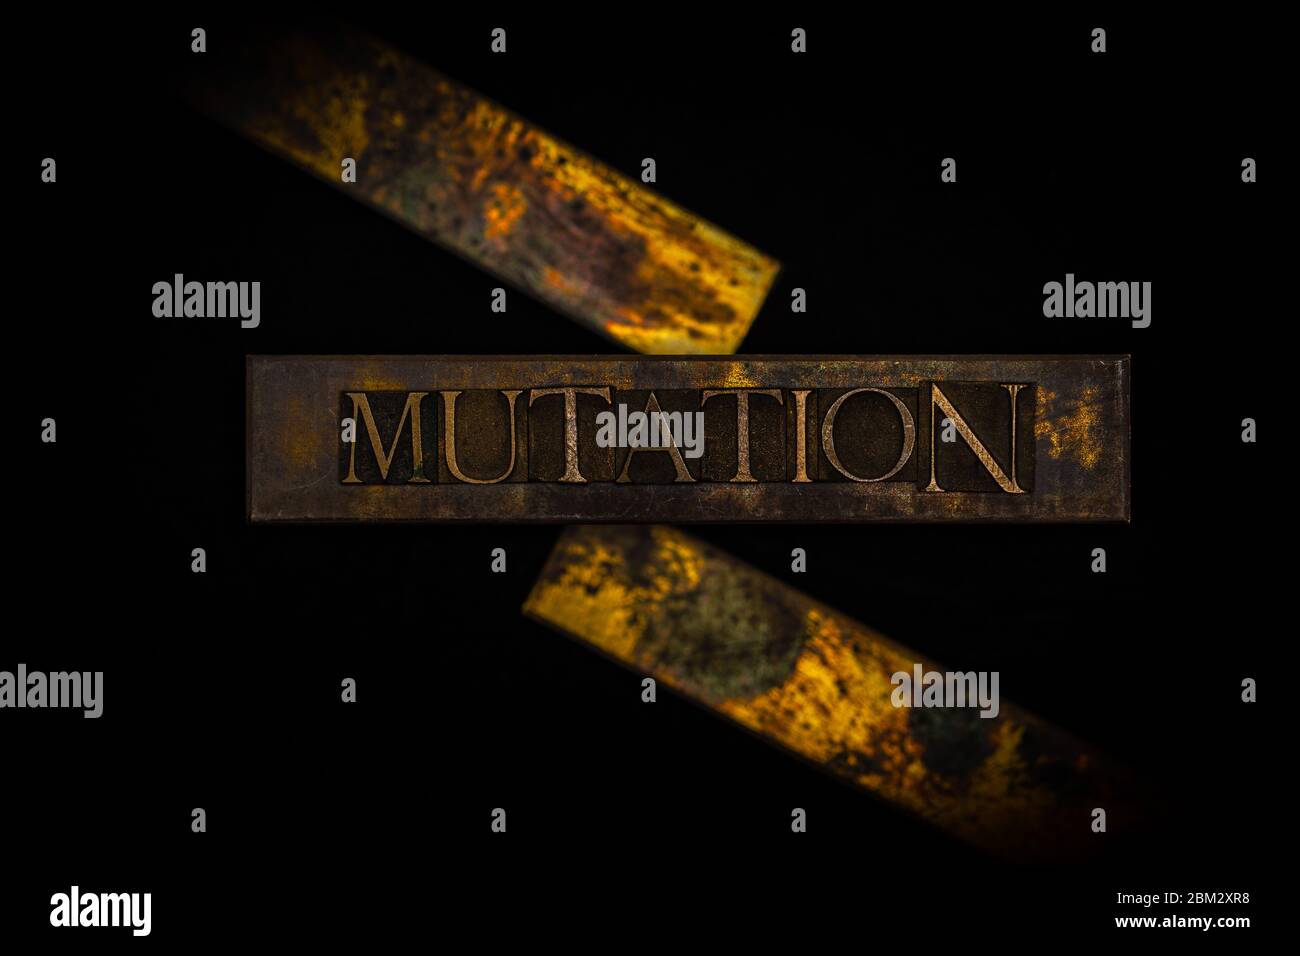 Photo of real authentic typeset letters forming Mutation text on vintage textured grunge copper and black background Stock Photo